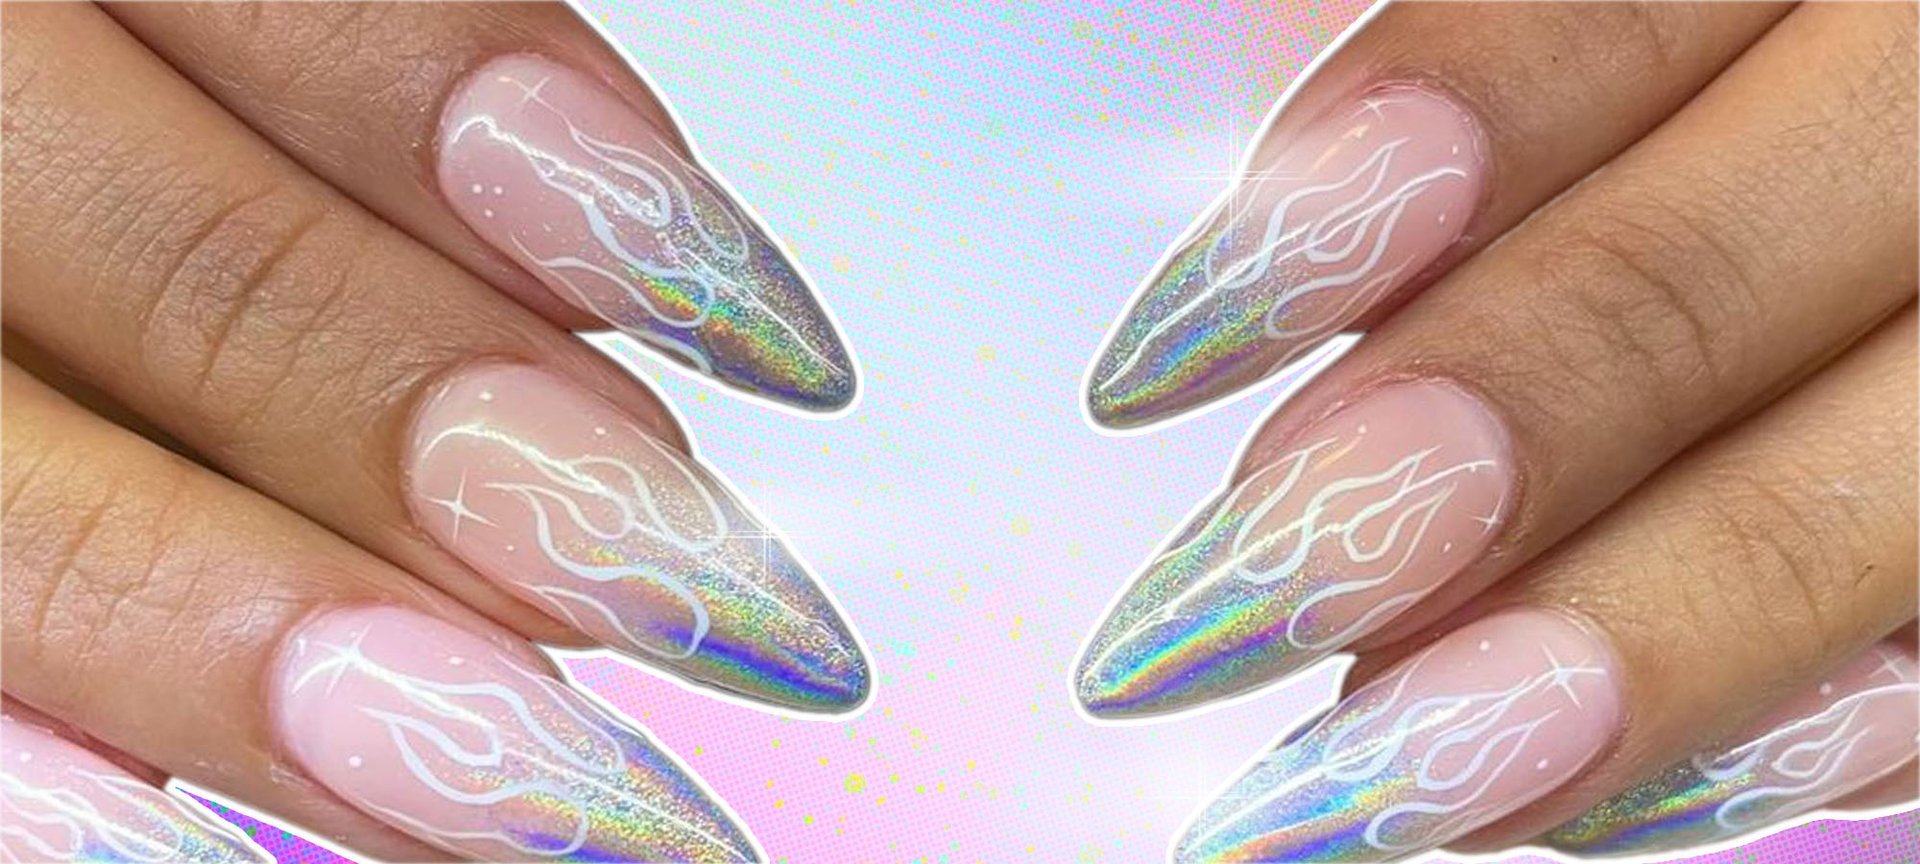 8 Holographic Nail Designs That Are Out of This World - L'Oréal Paris